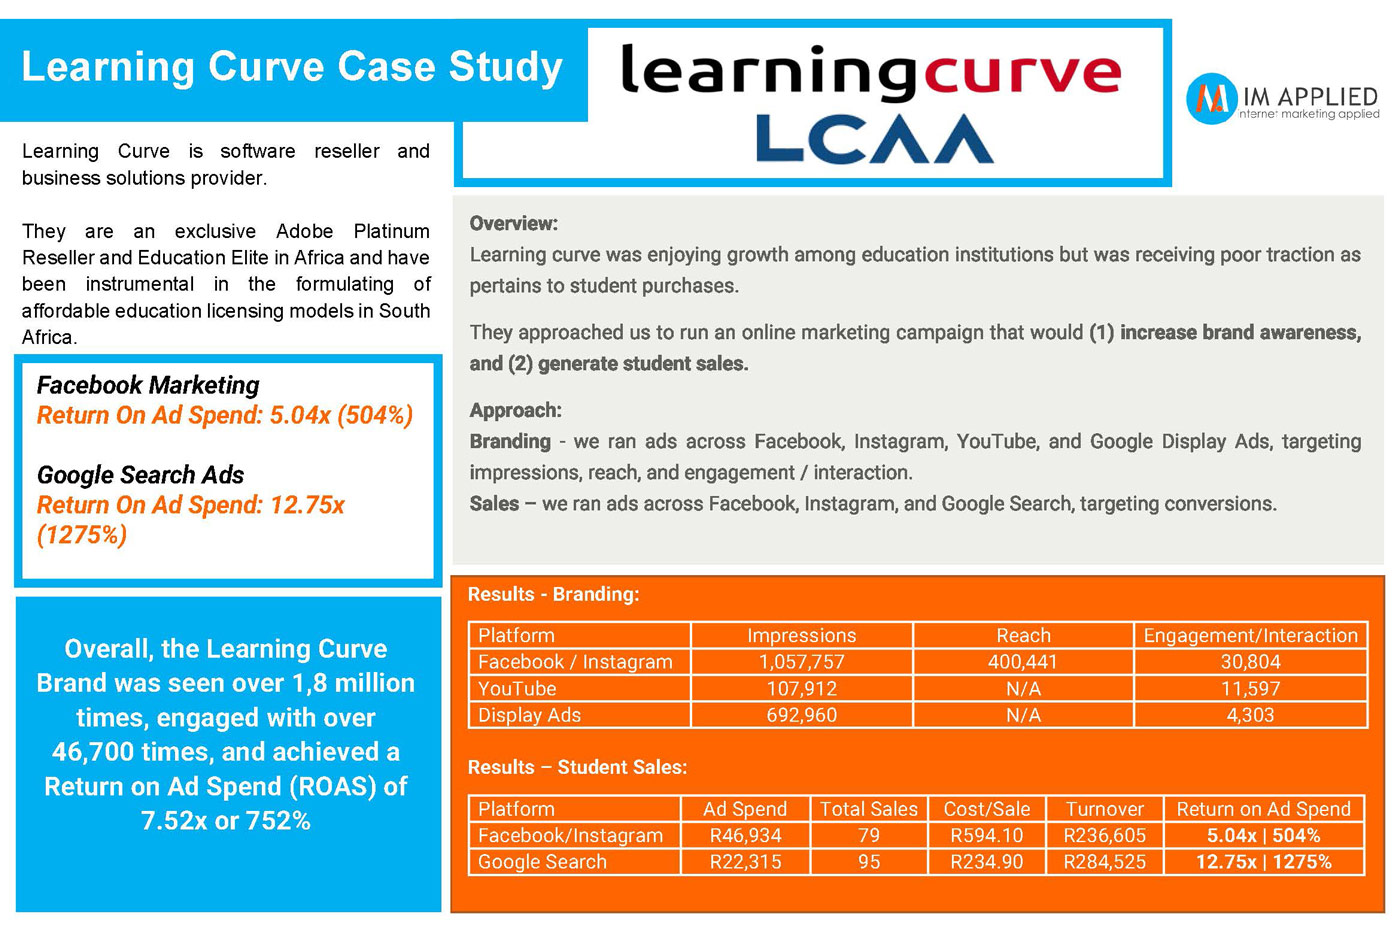 SMMA Case Study - Learning Curve